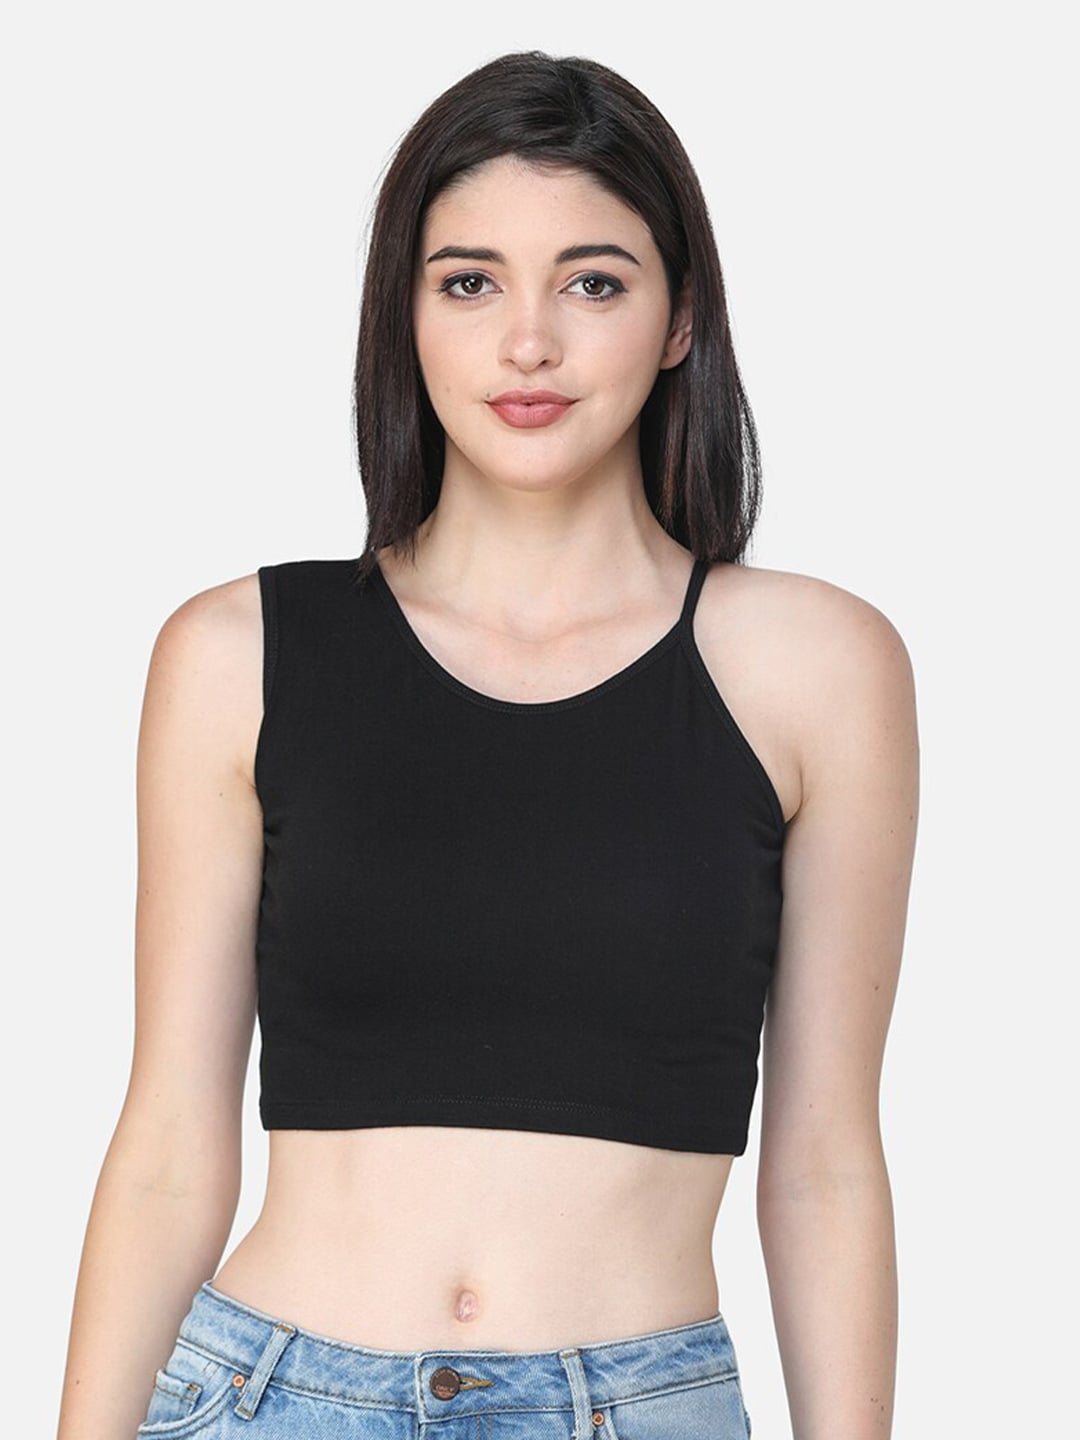 Cation Black Solid Crop Top Price in India